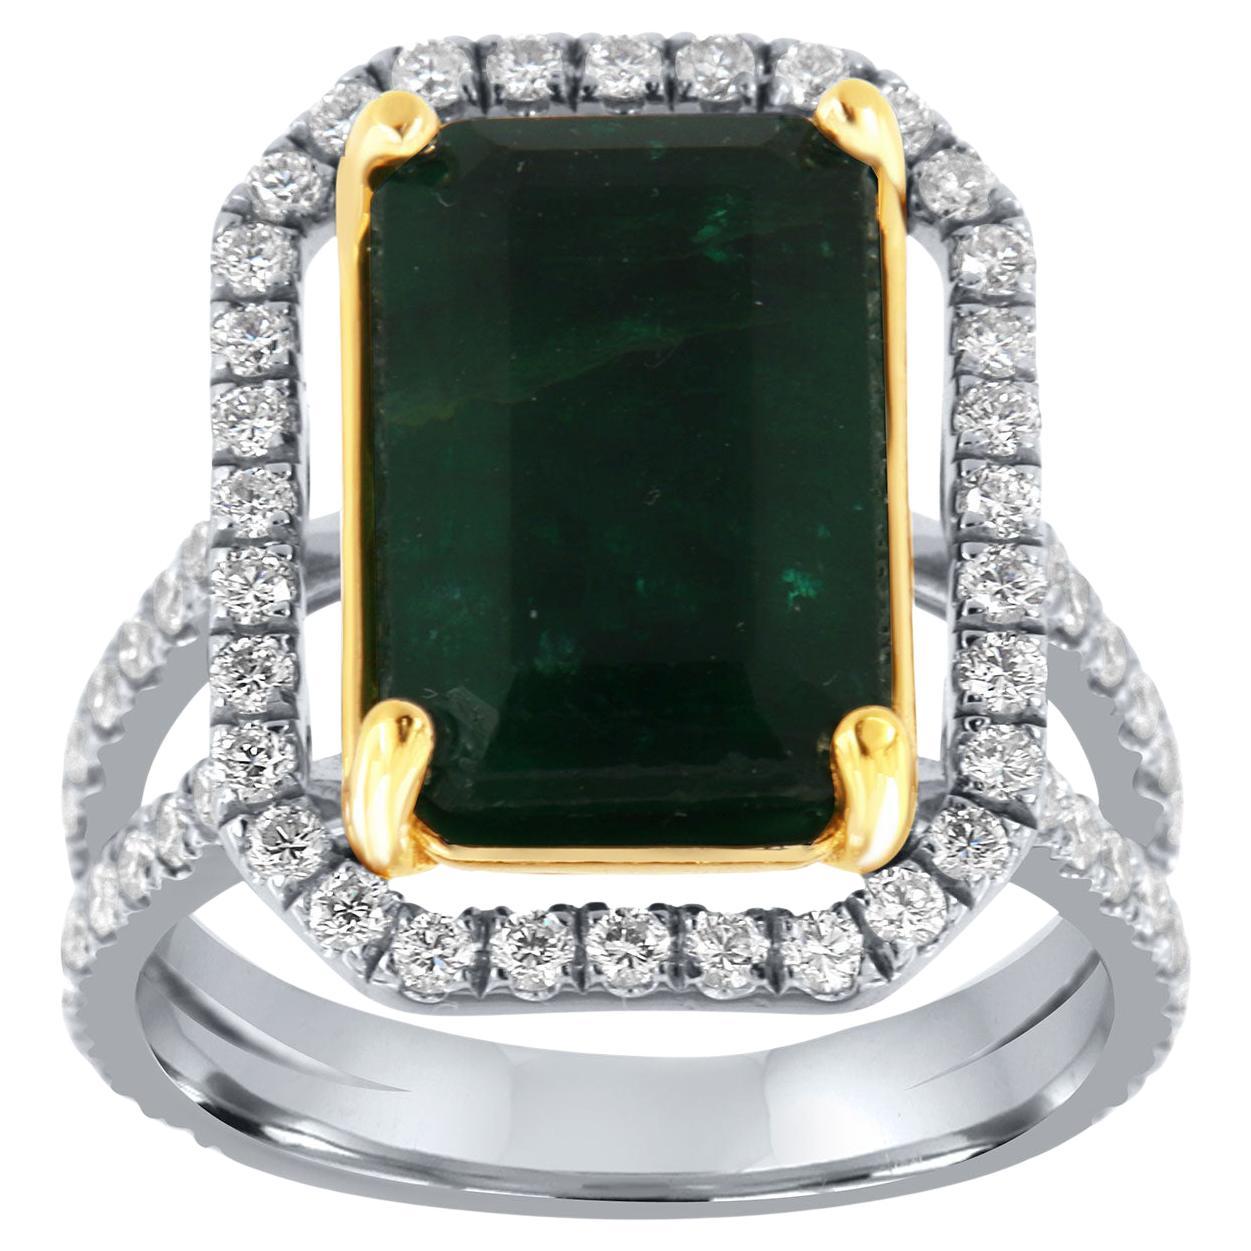 18K White & Yellow Gold GIA Certified 6.23 Carat Green Emerald Halo Diamond Ring For Sale